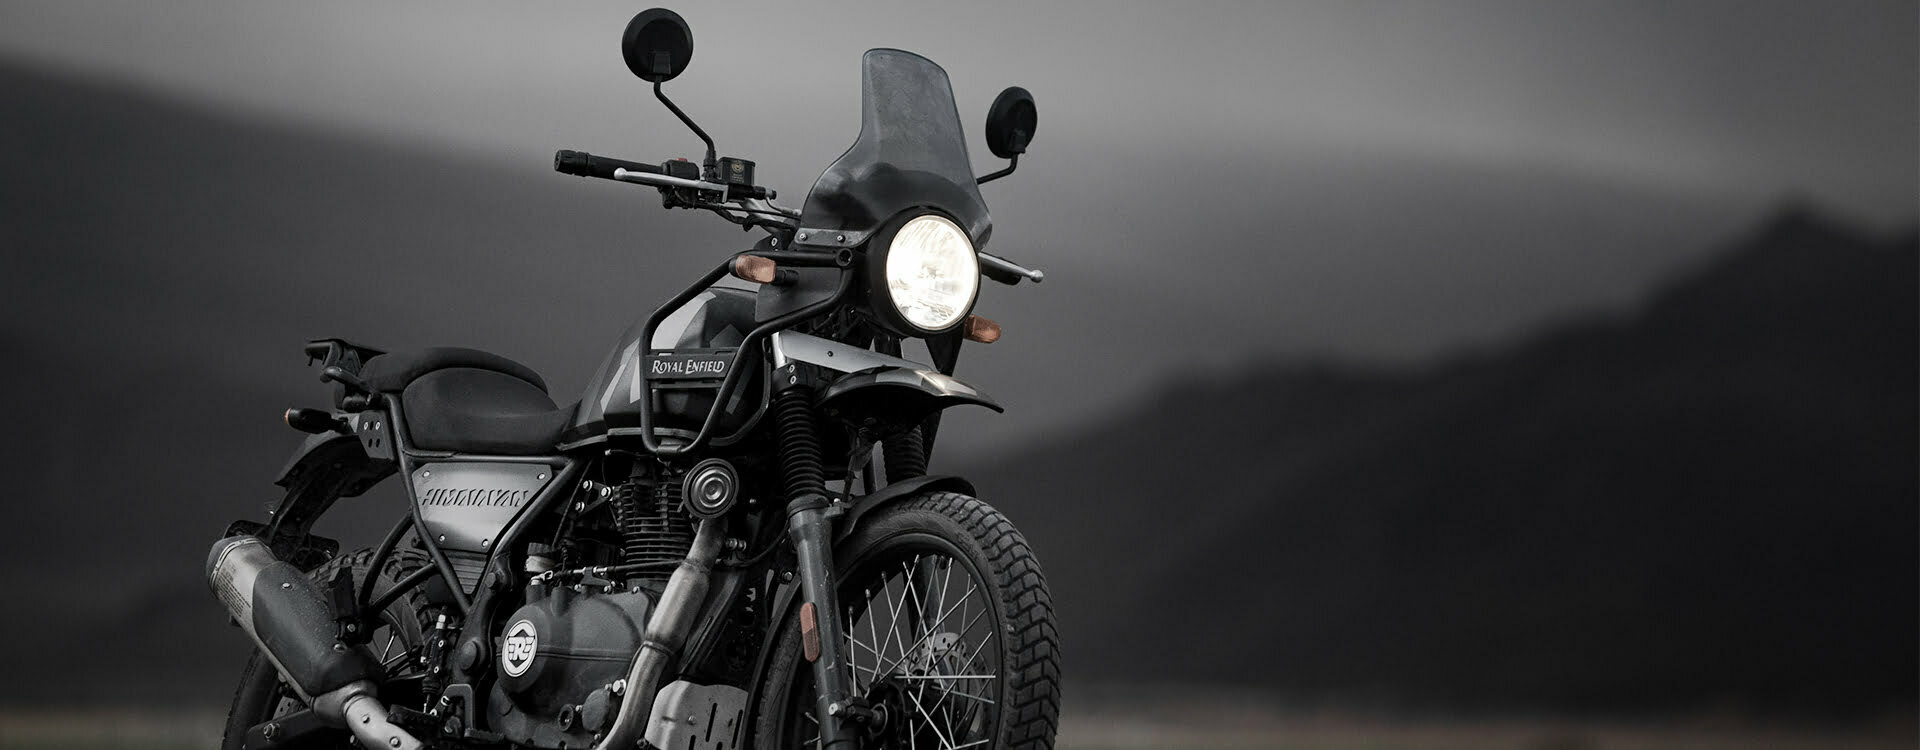 Three New Colors For Royal Enfield Himalayan Launched (2)